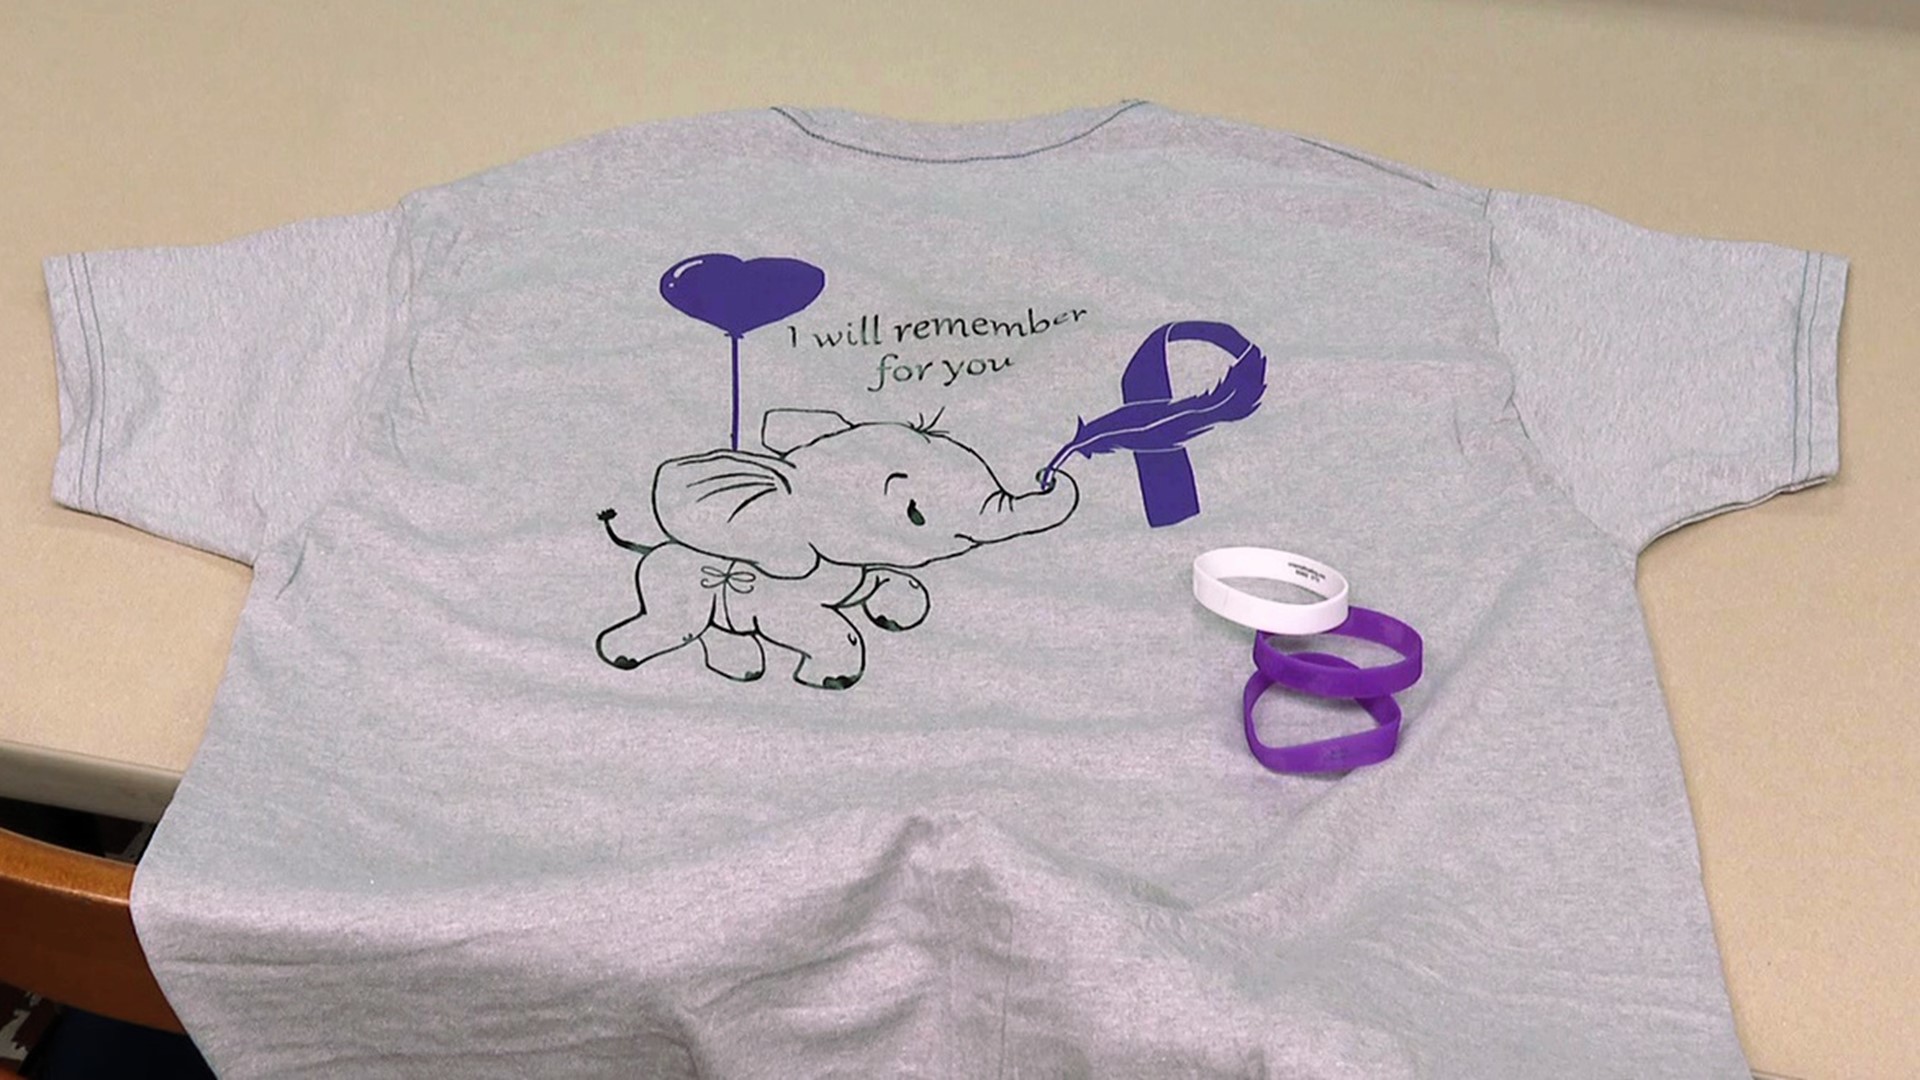 This month is National Alzheimer's awareness month and a group of kids in Schuylkill County wants to bring an end to the disease.